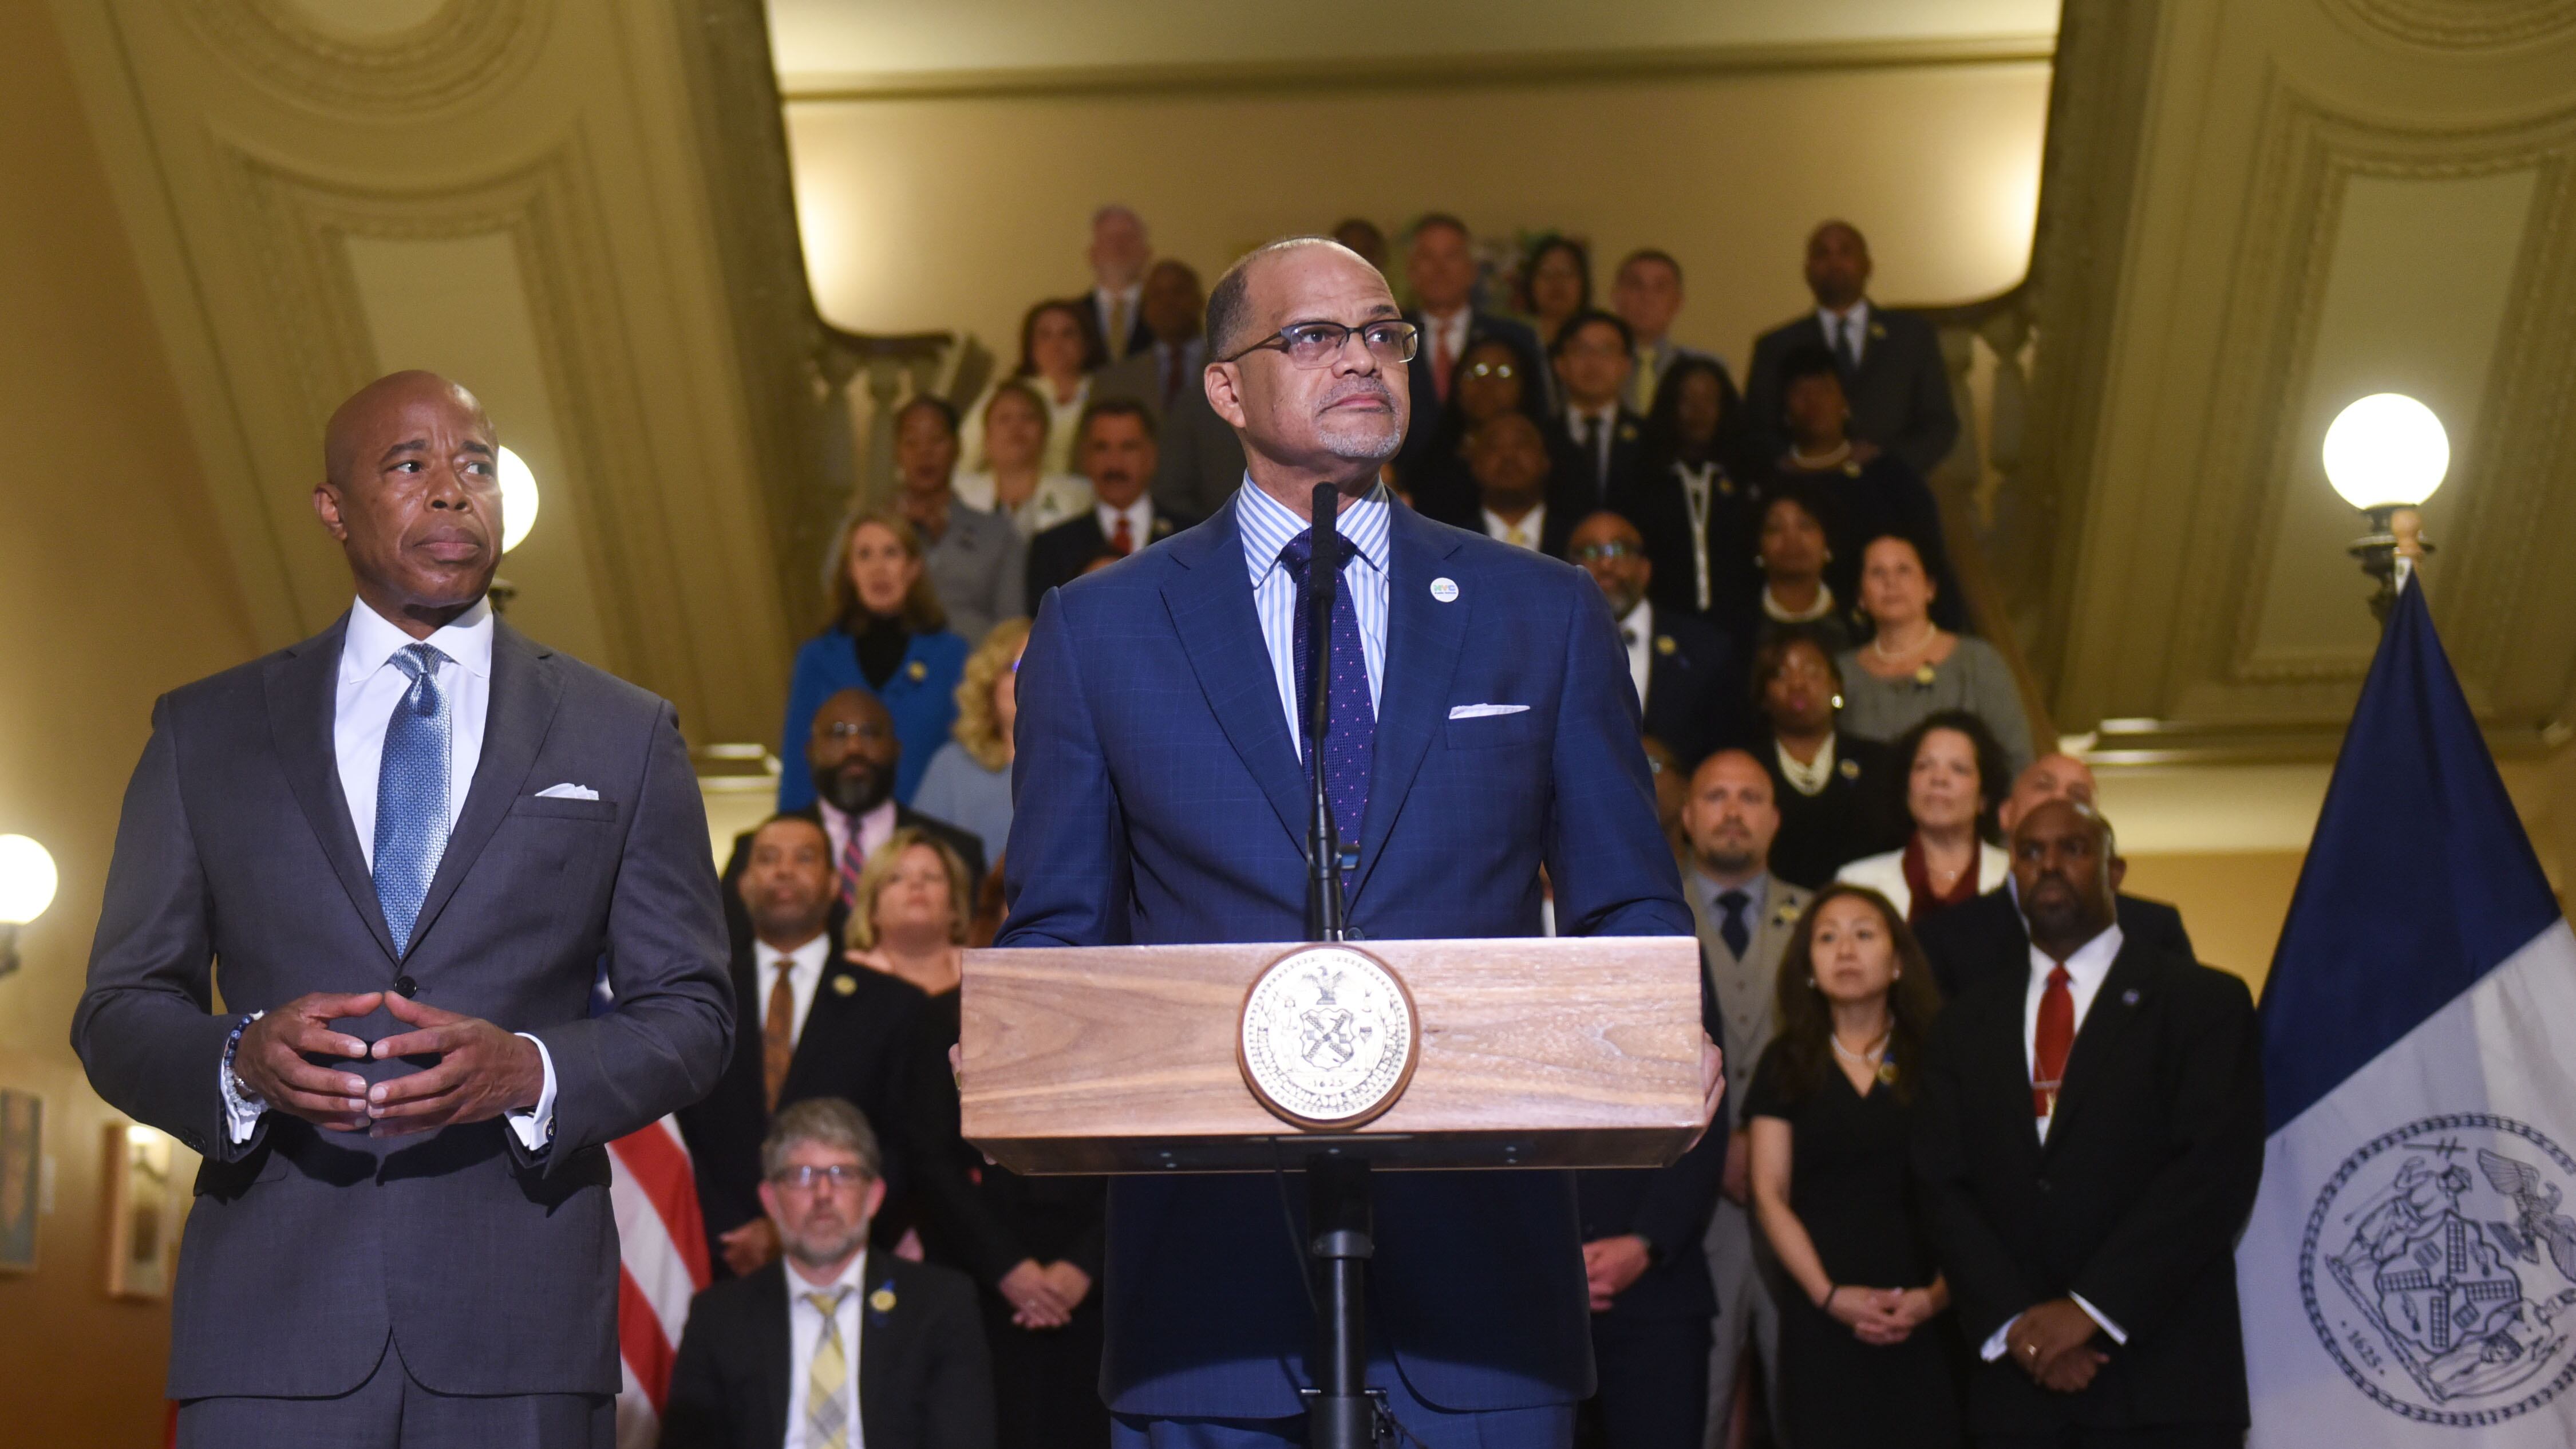 NYC Chancellor David Banks stands at a podium, with Mayor Eric Adams standing off to the left behind him.